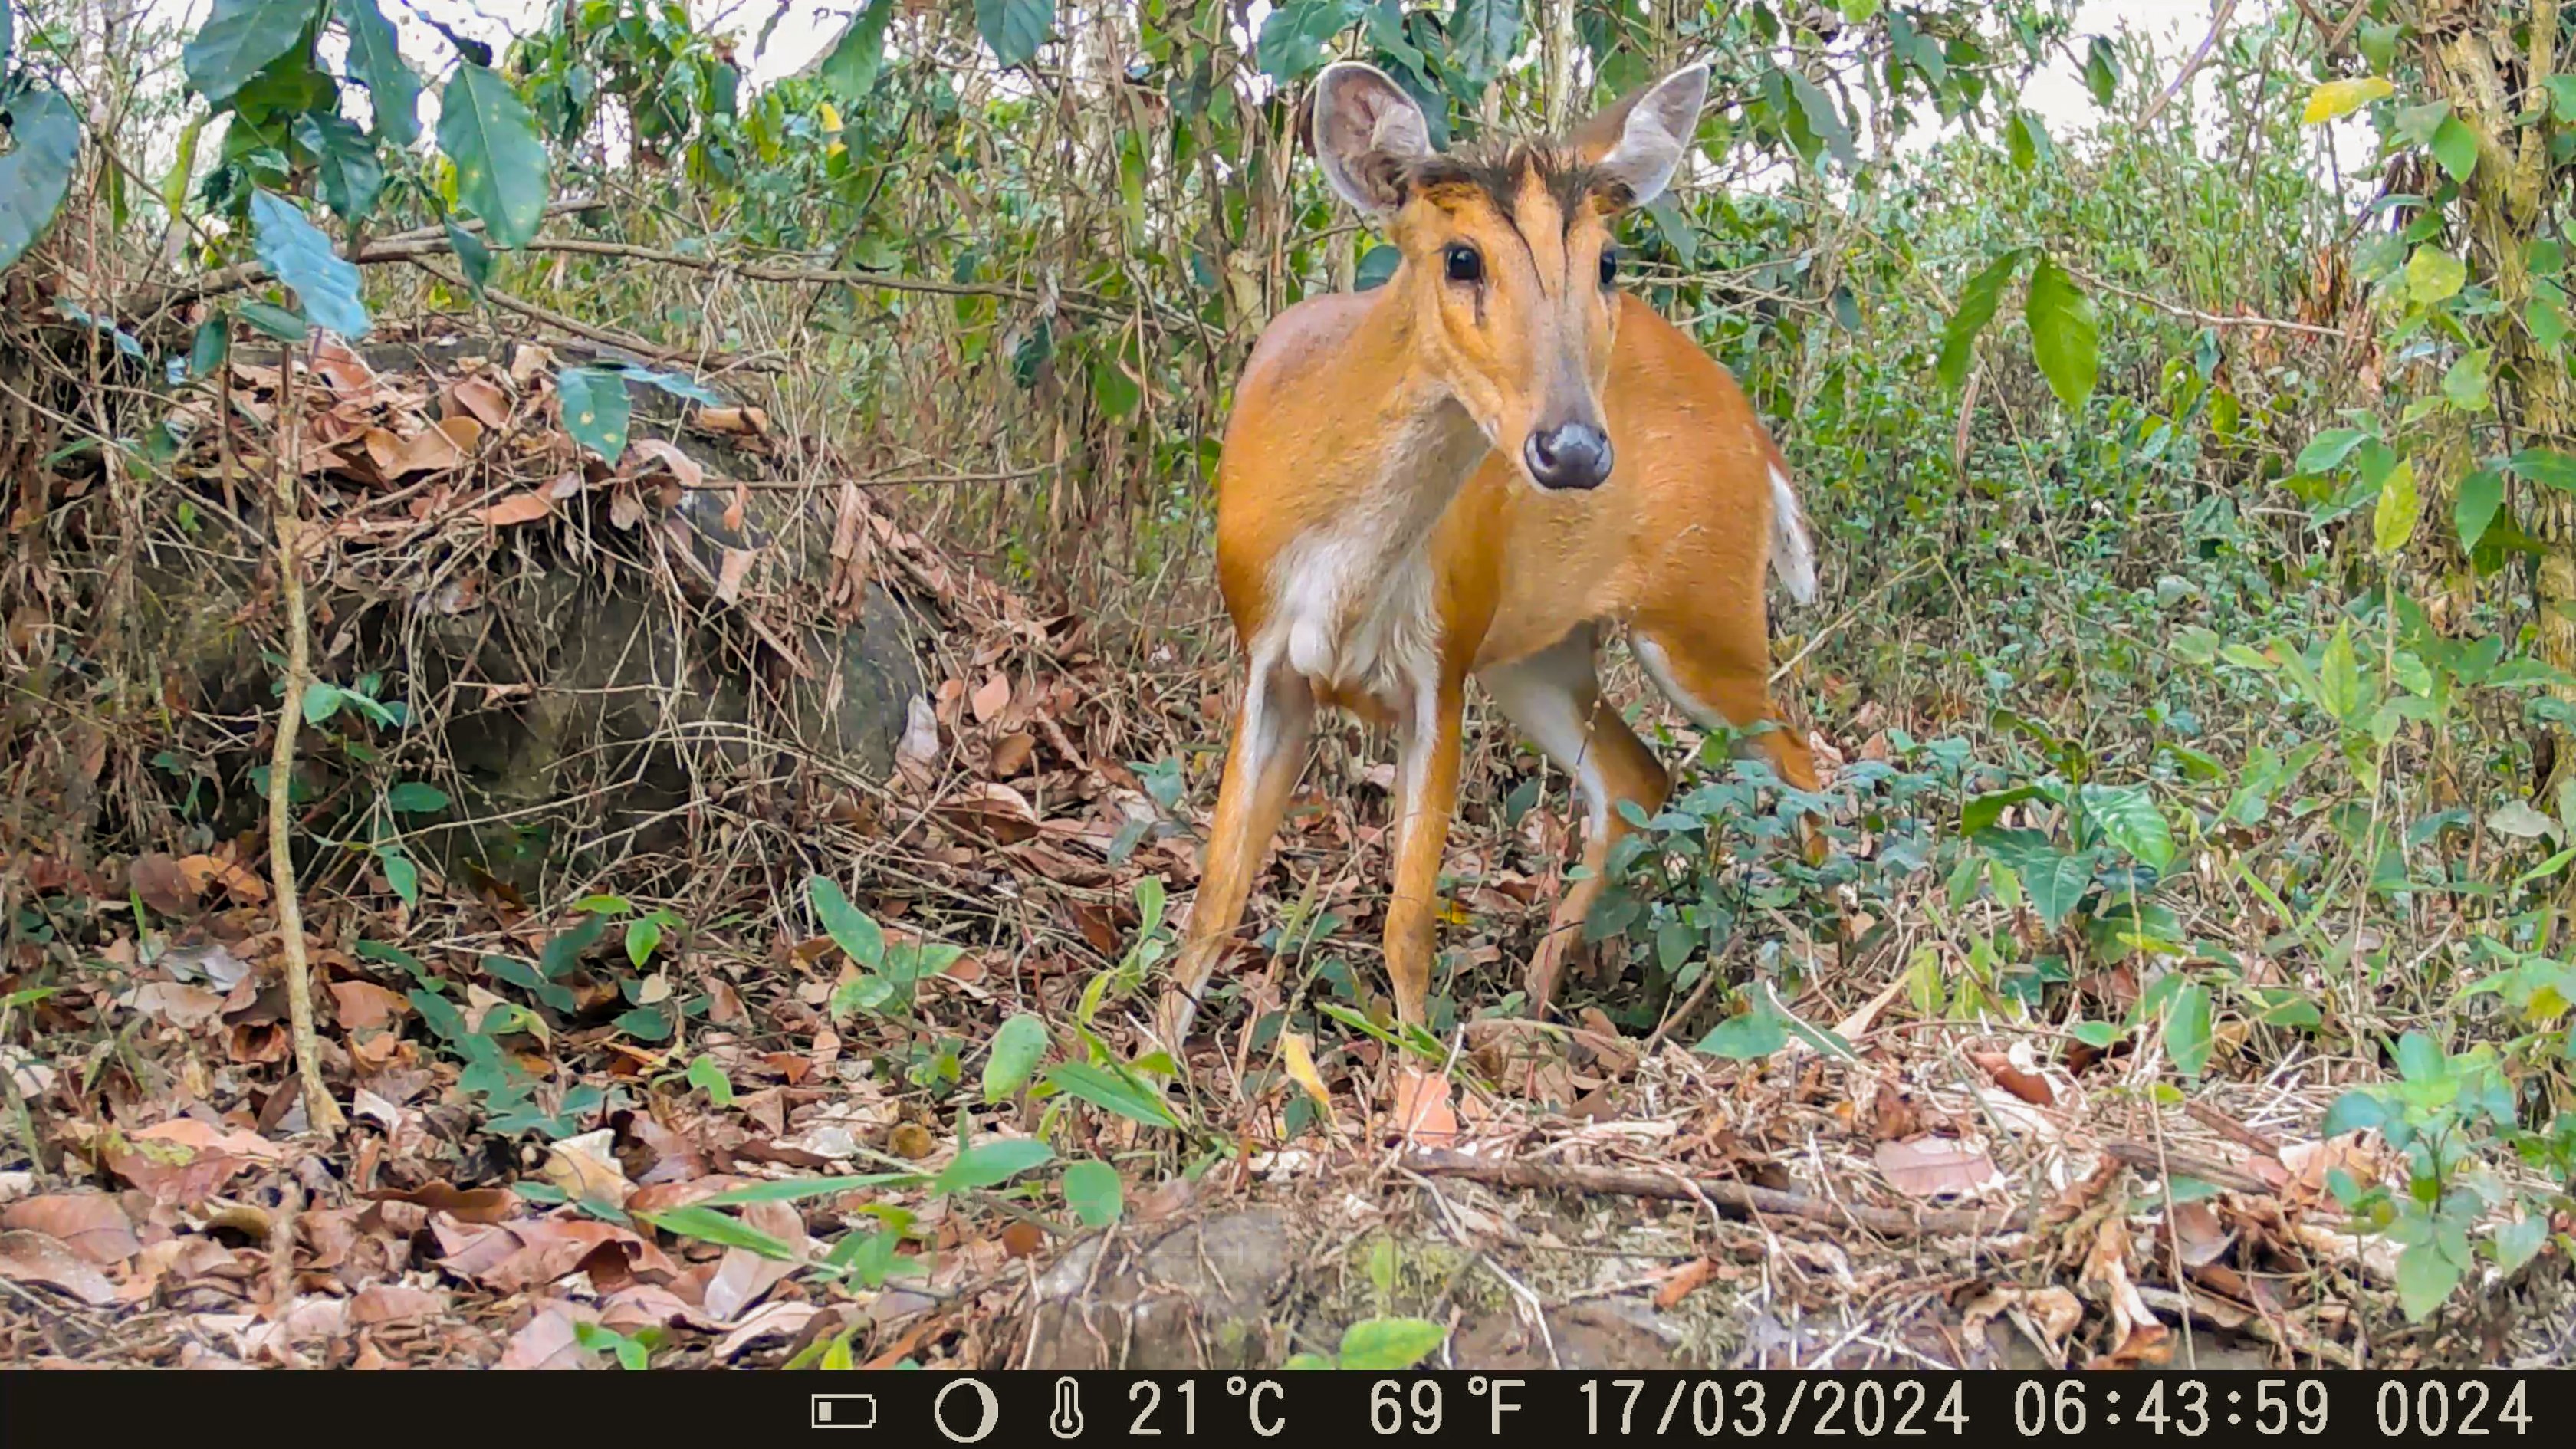 Discover the diverse wildlife of our coffee farm in Laos through our nature camera footage.